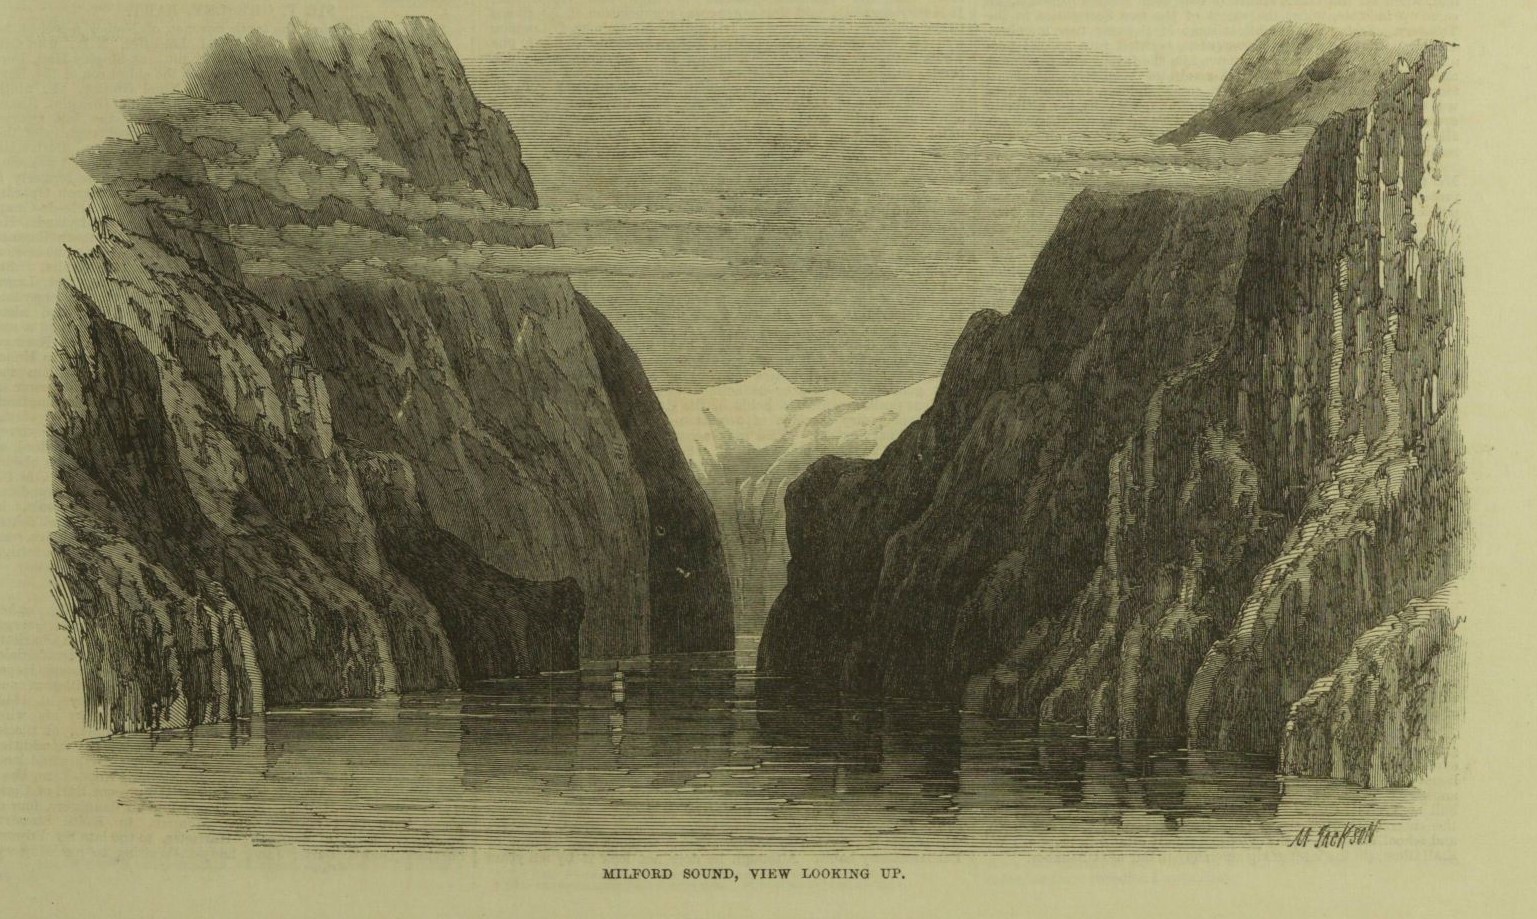 One of the three engravings of Cooper’s views of Milford Sound which appeared in The Illustrated London News, 2 January 1869.